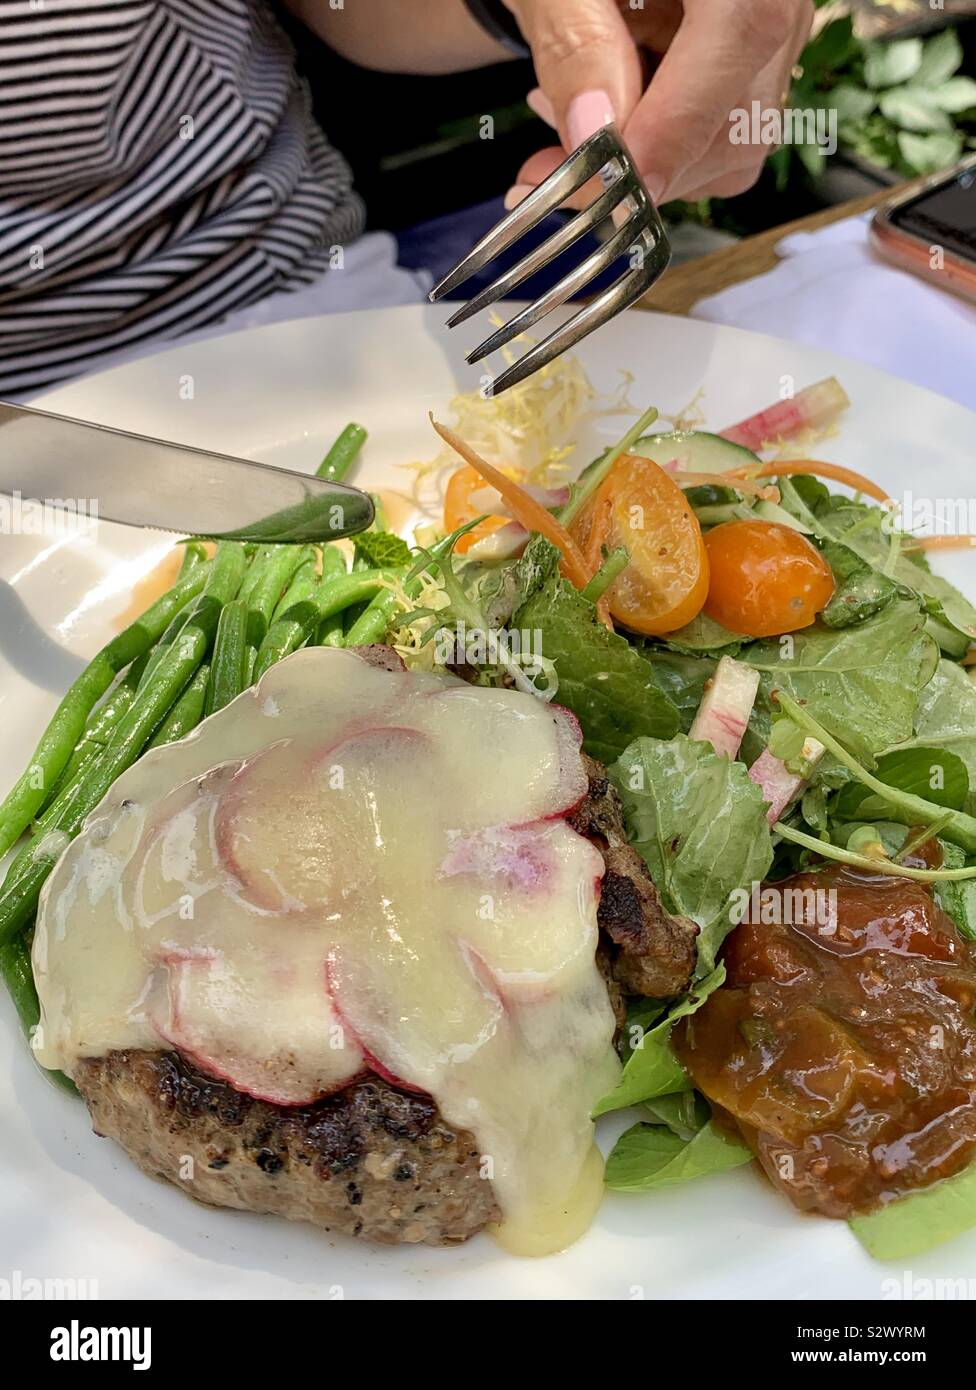 Keto burger with salad and no bun. Topped with sliced radishes and melted cheese. Stock Photo